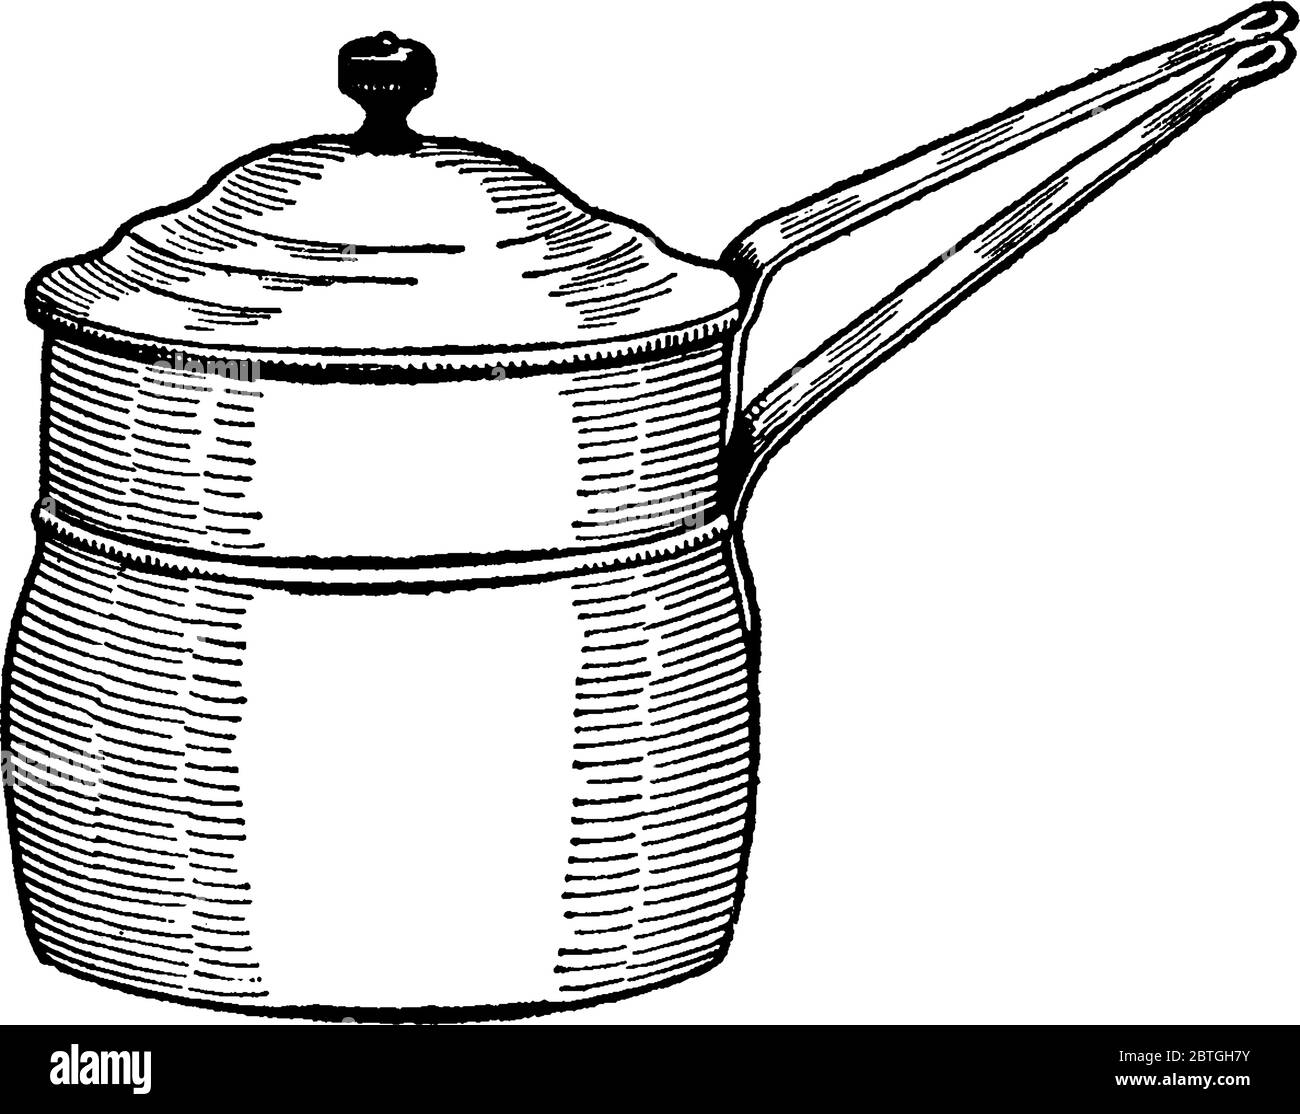 Double boiler is an utensil used for cooking soups etc., vintage line drawing or engraving illustration. Stock Vector